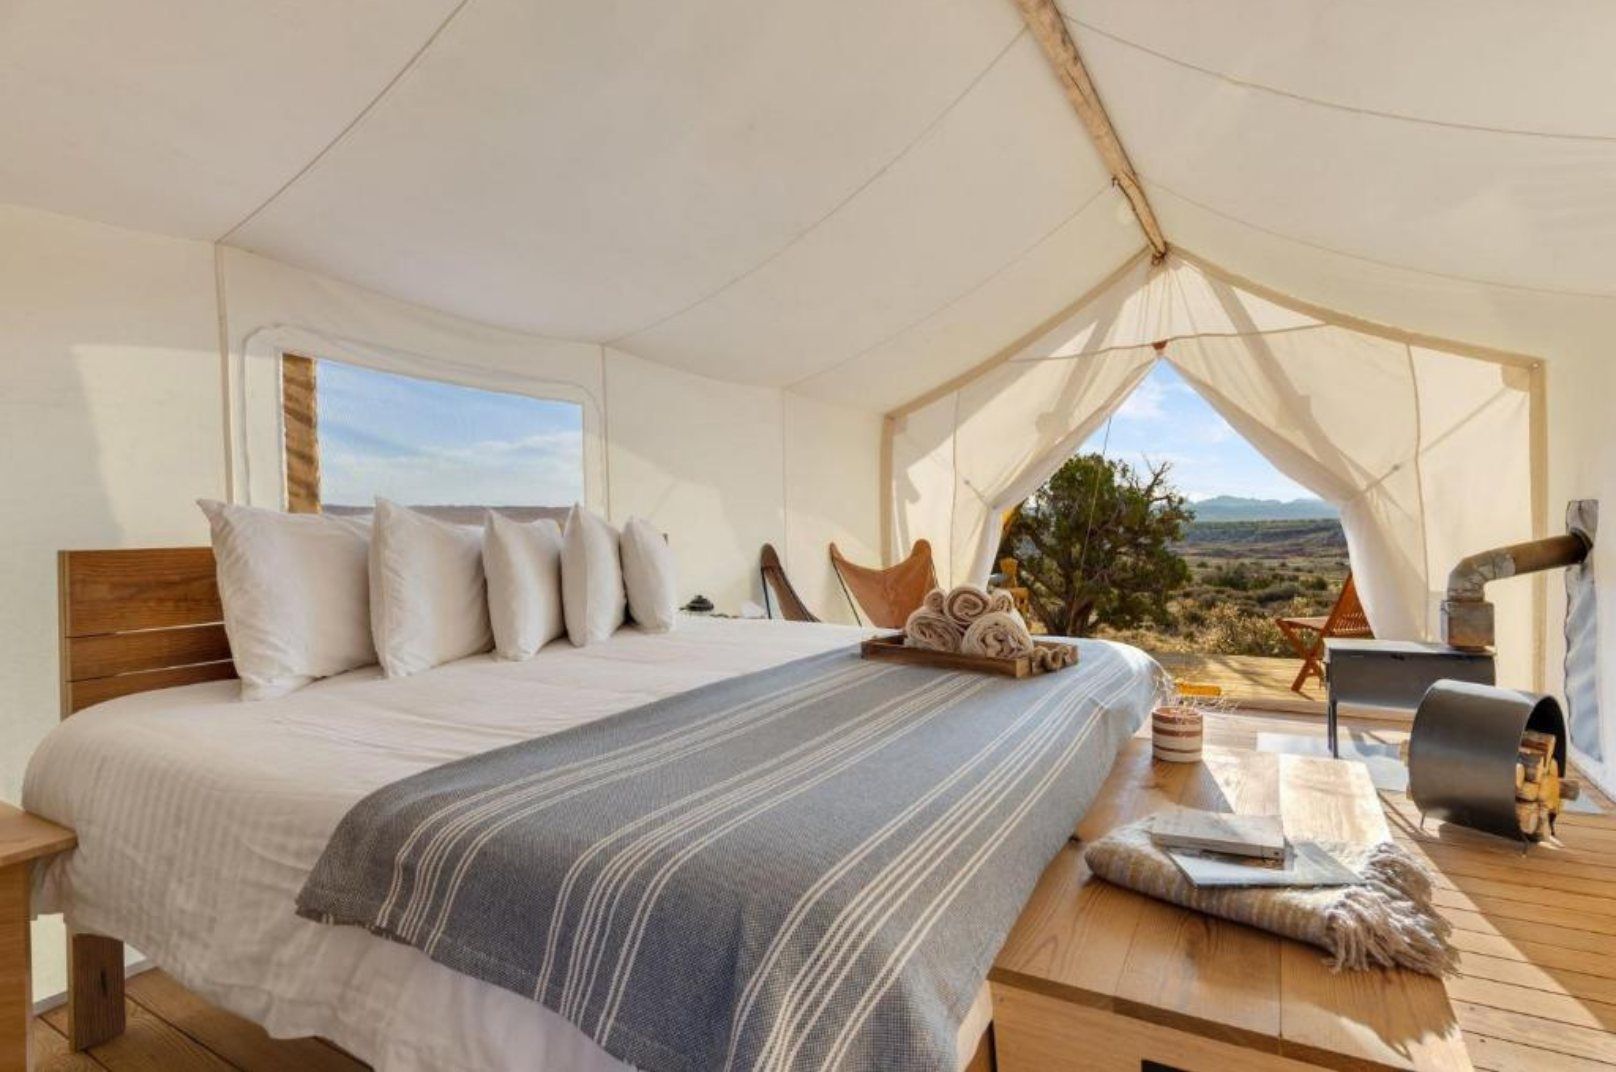 glamping in Bryce Canyon National Park